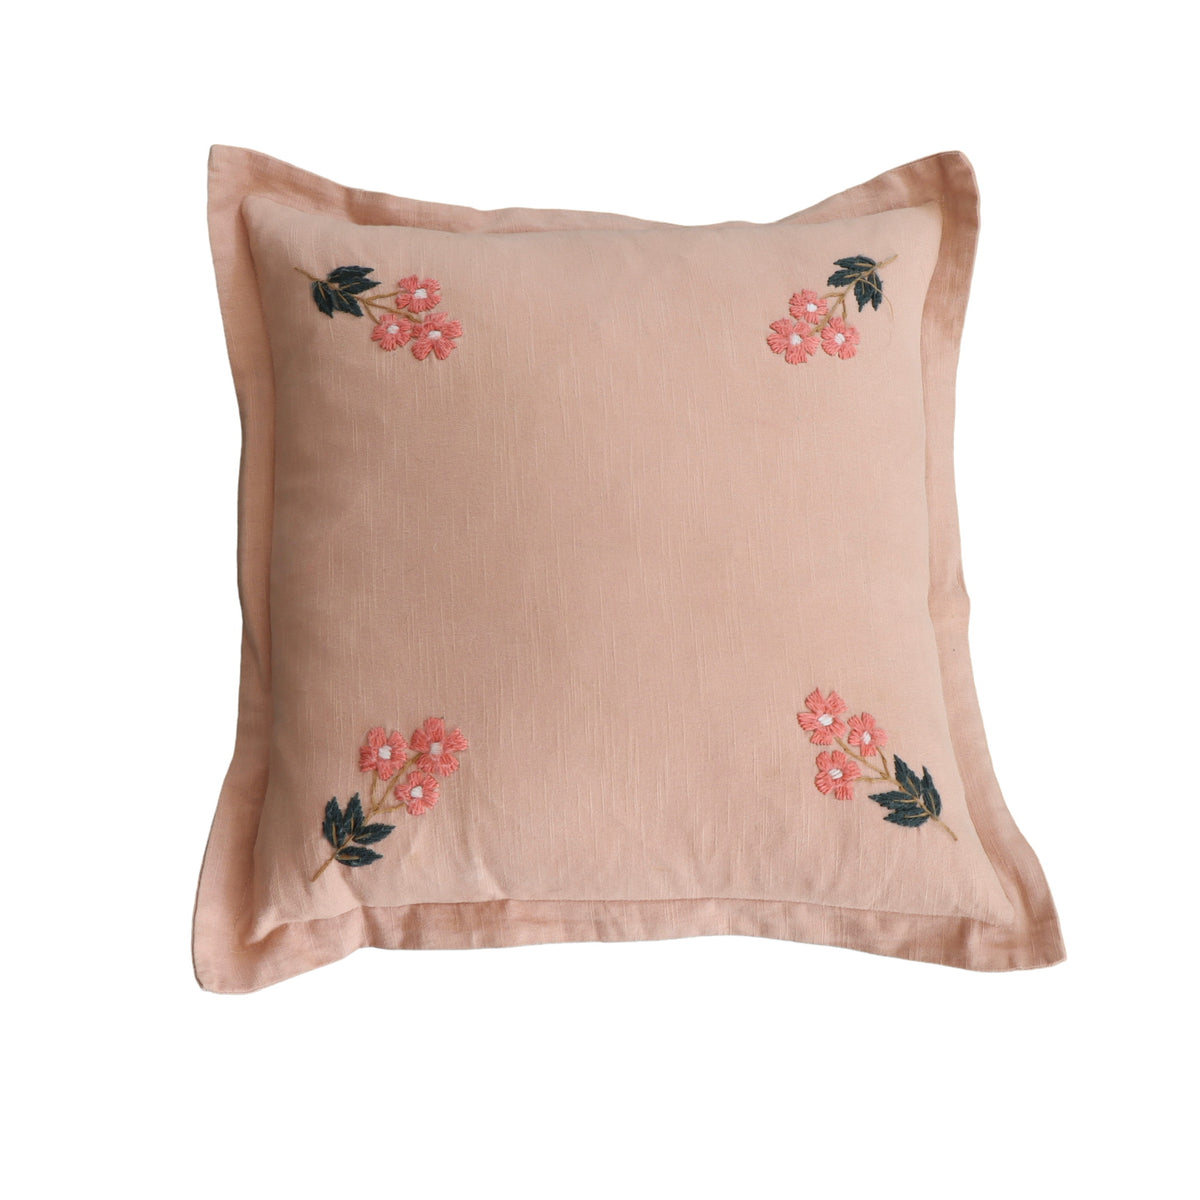 Ada Clare Embroidered Pillow Cover - Holistic Habitat 